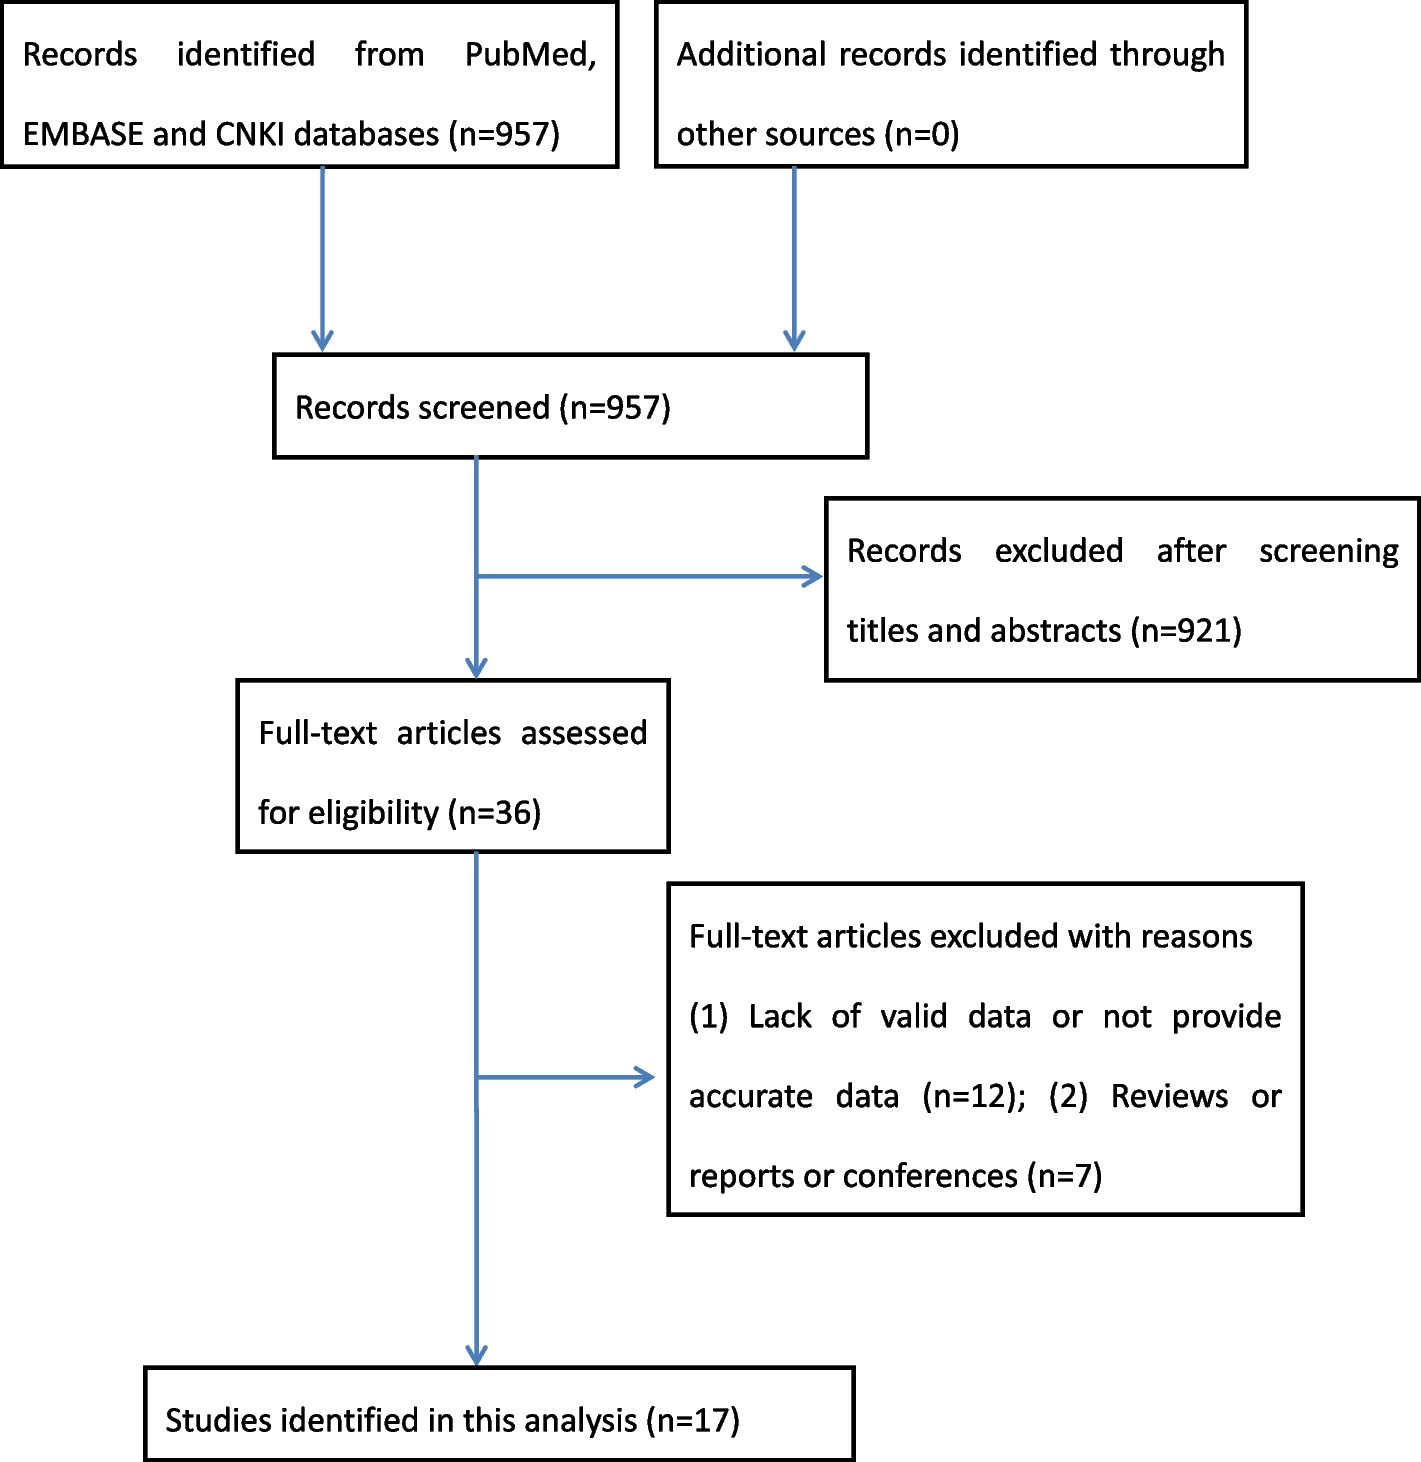 Pretreatment with or without GnRH-agonist before frozen–thawed embryo transfer in patients with PCOS: a systematic review and meta-analysis